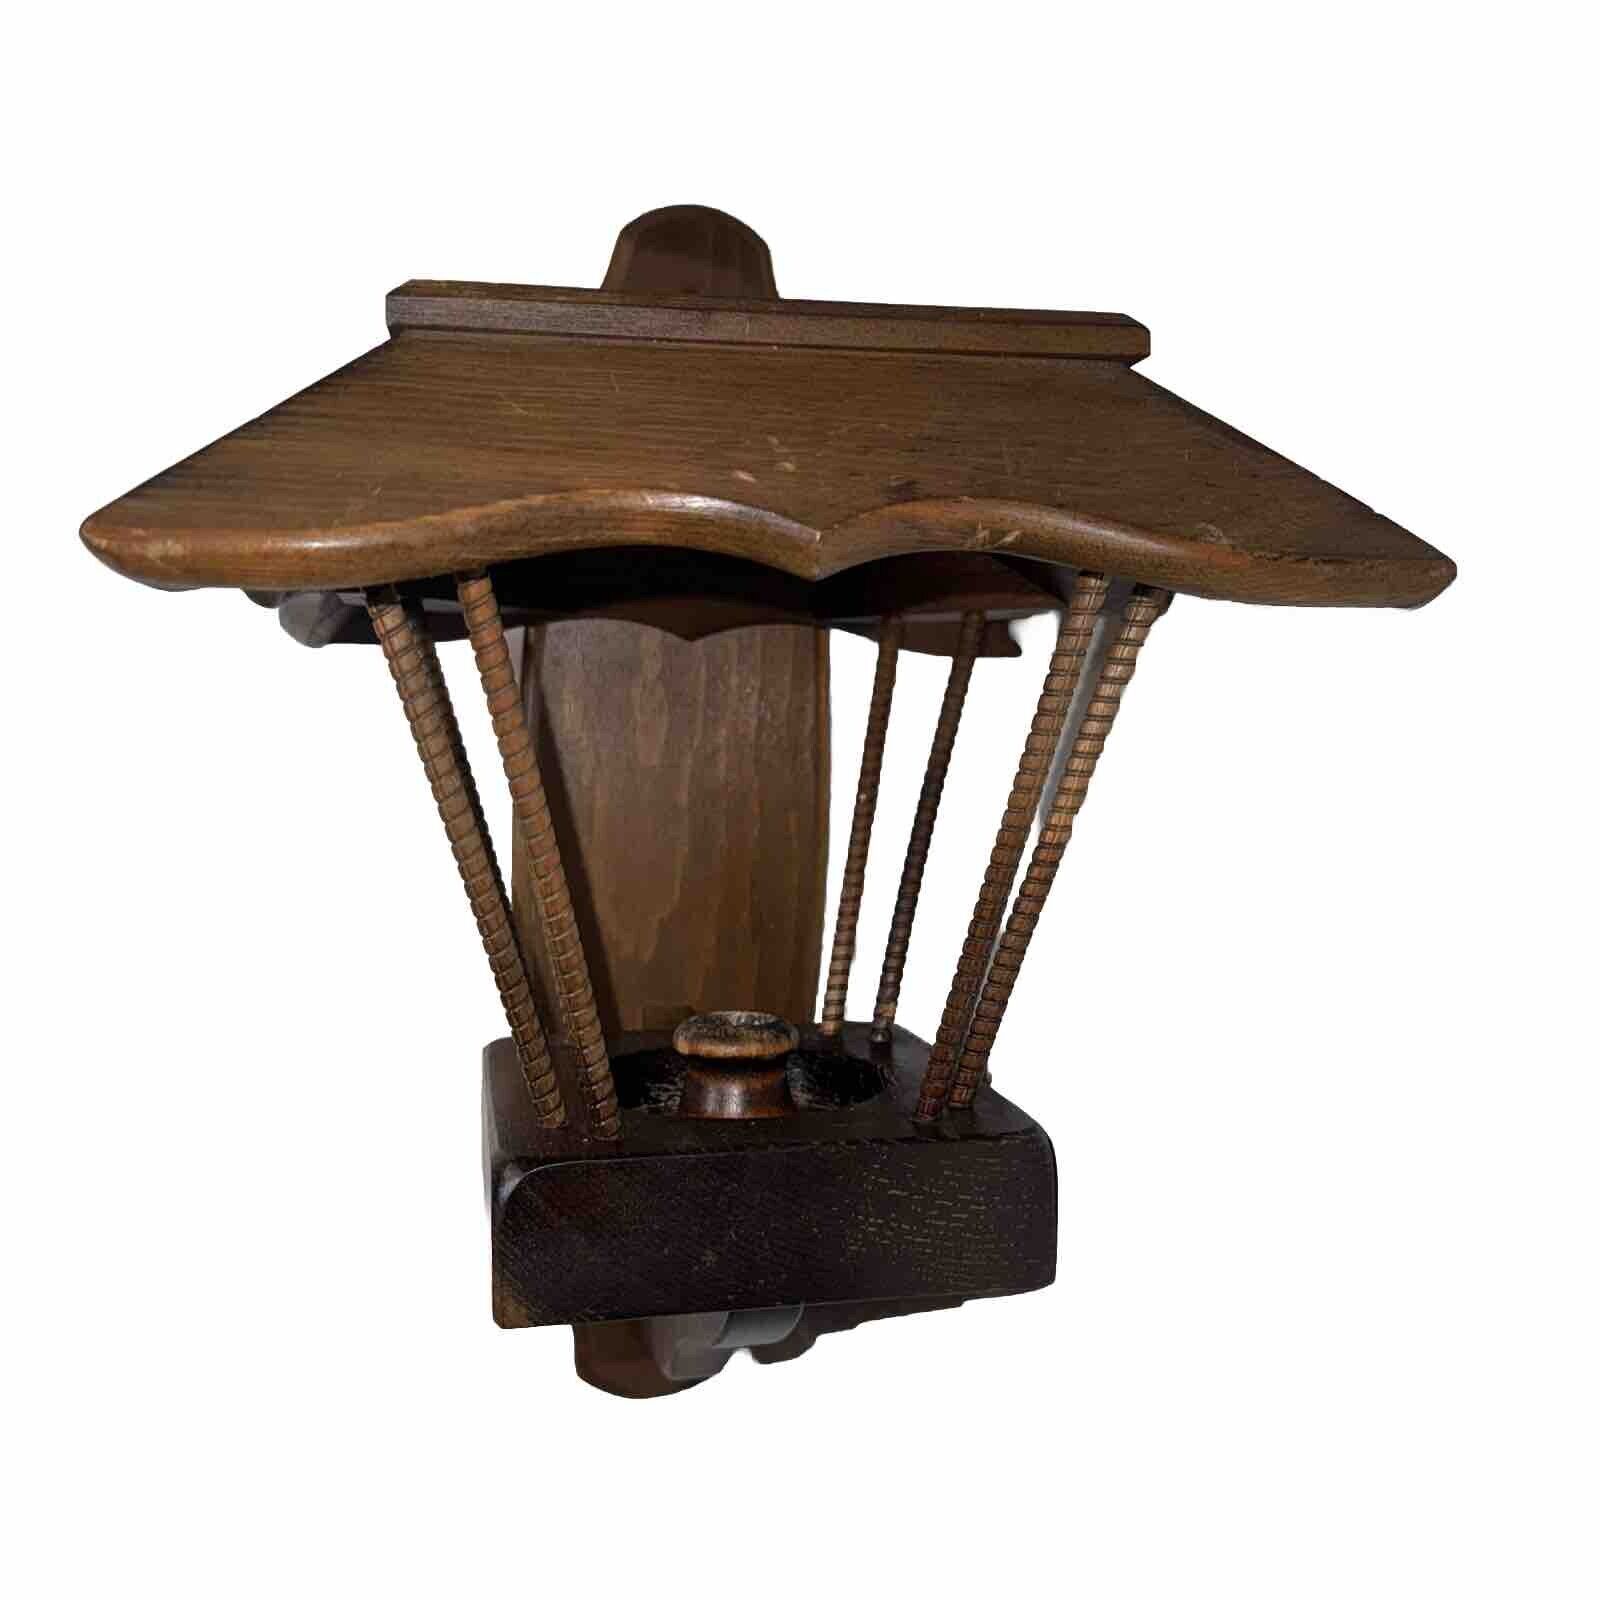 Vintage Walnut Lantern Wall Sconce Candle Lamplight By Cornwall Wood Products US